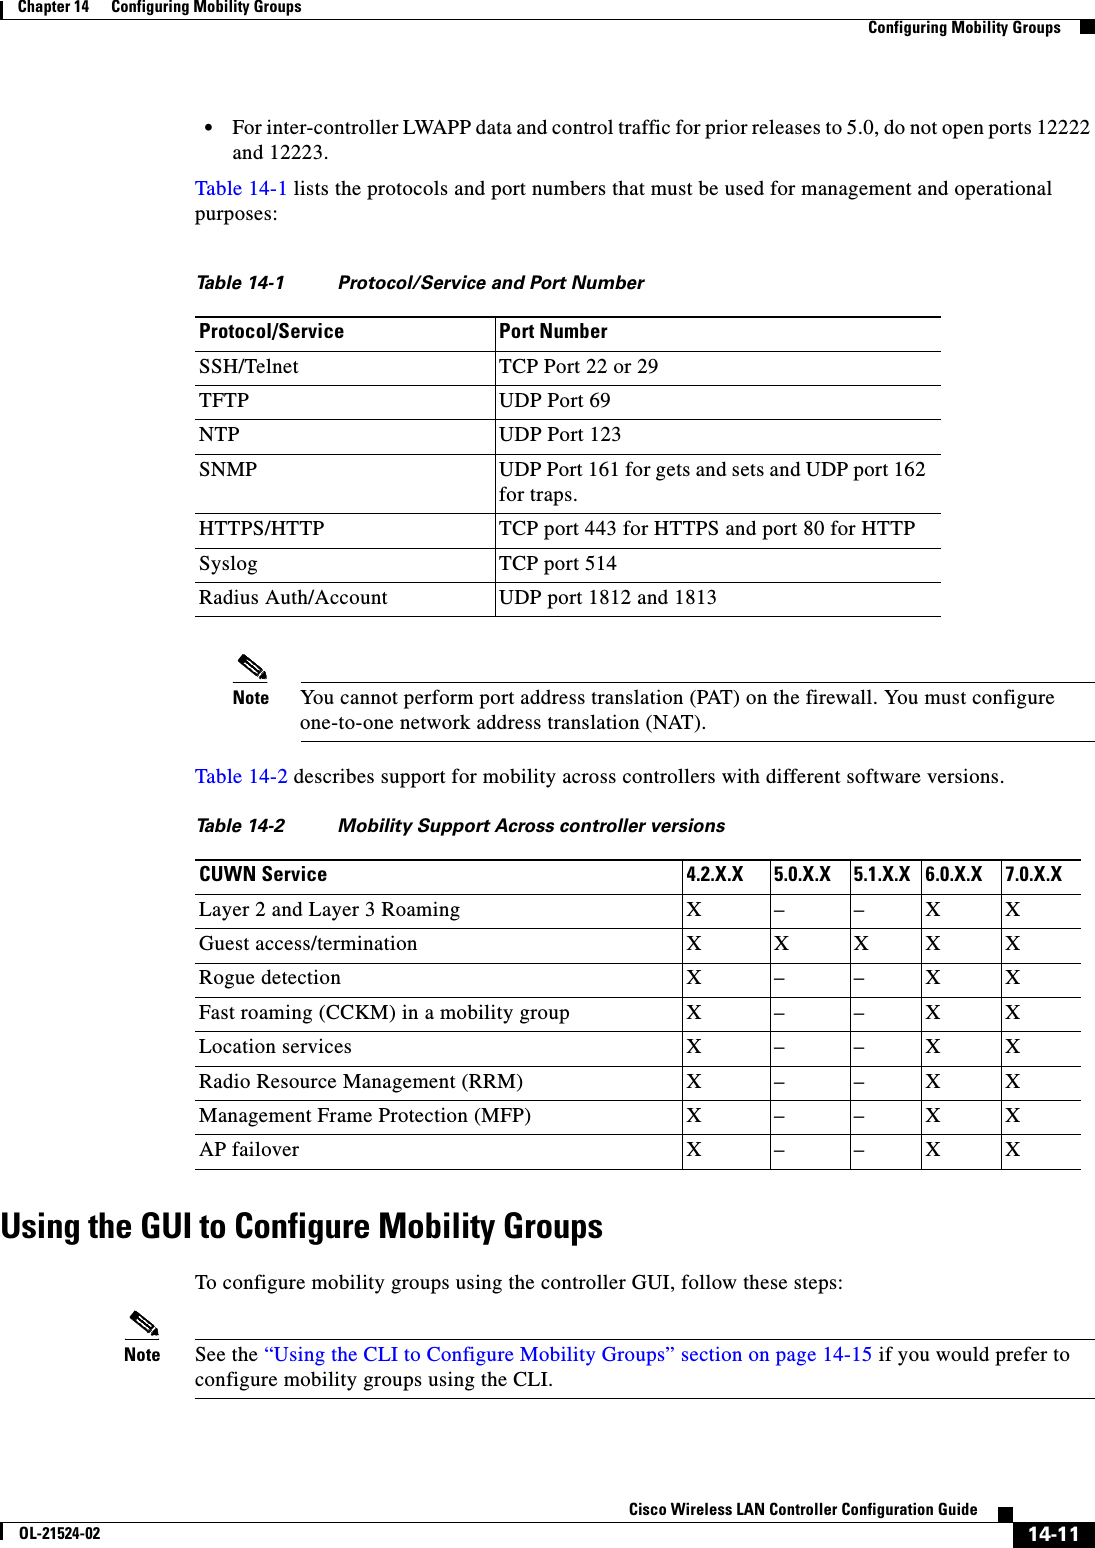  14-11Cisco Wireless LAN Controller Configuration GuideOL-21524-02Chapter 14      Configuring Mobility Groups  Configuring Mobility Groups  • For inter-controller LWAPP data and control traffic for prior releases to 5.0, do not open ports 12222 and 12223.Table 14-1 lists the protocols and port numbers that must be used for management and operational purposes:Note You cannot perform port address translation (PAT) on the firewall. You must configure one-to-one network address translation (NAT).Table 14-2 describes support for mobility across controllers with different software versions.Using the GUI to Configure Mobility GroupsTo configure mobility groups using the controller GUI, follow these steps:Note See the “Using the CLI to Configure Mobility Groups” section on page 14-15 if you would prefer to configure mobility groups using the CLI.Ta b l e  14-1 Protocol/Service and Port NumberProtocol/Service Port NumberSSH/Telnet TCP Port 22 or 29TFTP UDP Port 69NTP UDP Port 123SNMP UDP Port 161 for gets and sets and UDP port 162 for traps.HTTPS/HTTP TCP port 443 for HTTPS and port 80 for HTTPSyslog TCP port 514Radius Auth/Account UDP port 1812 and 1813Ta b l e  14-2 Mobility Support Across controller versionsCUWN Service 4.2.X.X 5.0.X.X 5.1.X.X 6.0.X.X 7.0.X.XLayer 2 and Layer 3 Roaming X – – X XGuest access/termination X X X X XRogue detection X – – X XFast roaming (CCKM) in a mobility group X – – X XLocation services X – – X XRadio Resource Management (RRM) X – – X XManagement Frame Protection (MFP) X – – X XAP failover X – – X X